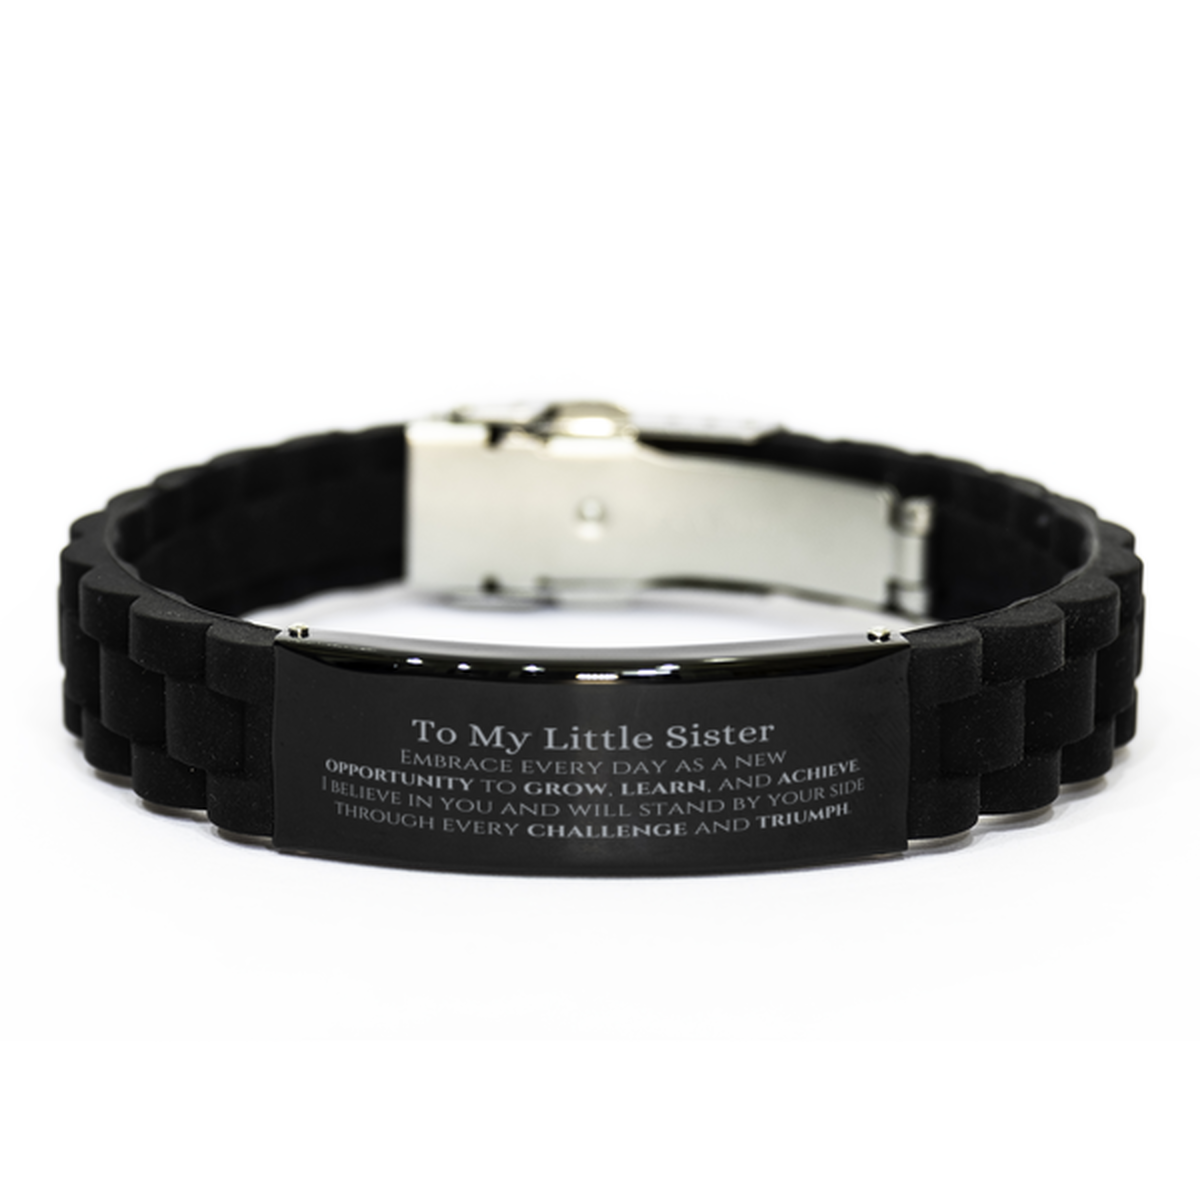 To My Little Sister Gifts, I believe in you and will stand by your side, Inspirational Black Glidelock Clasp Bracelet For Little Sister, Birthday Christmas Motivational Little Sister Gifts